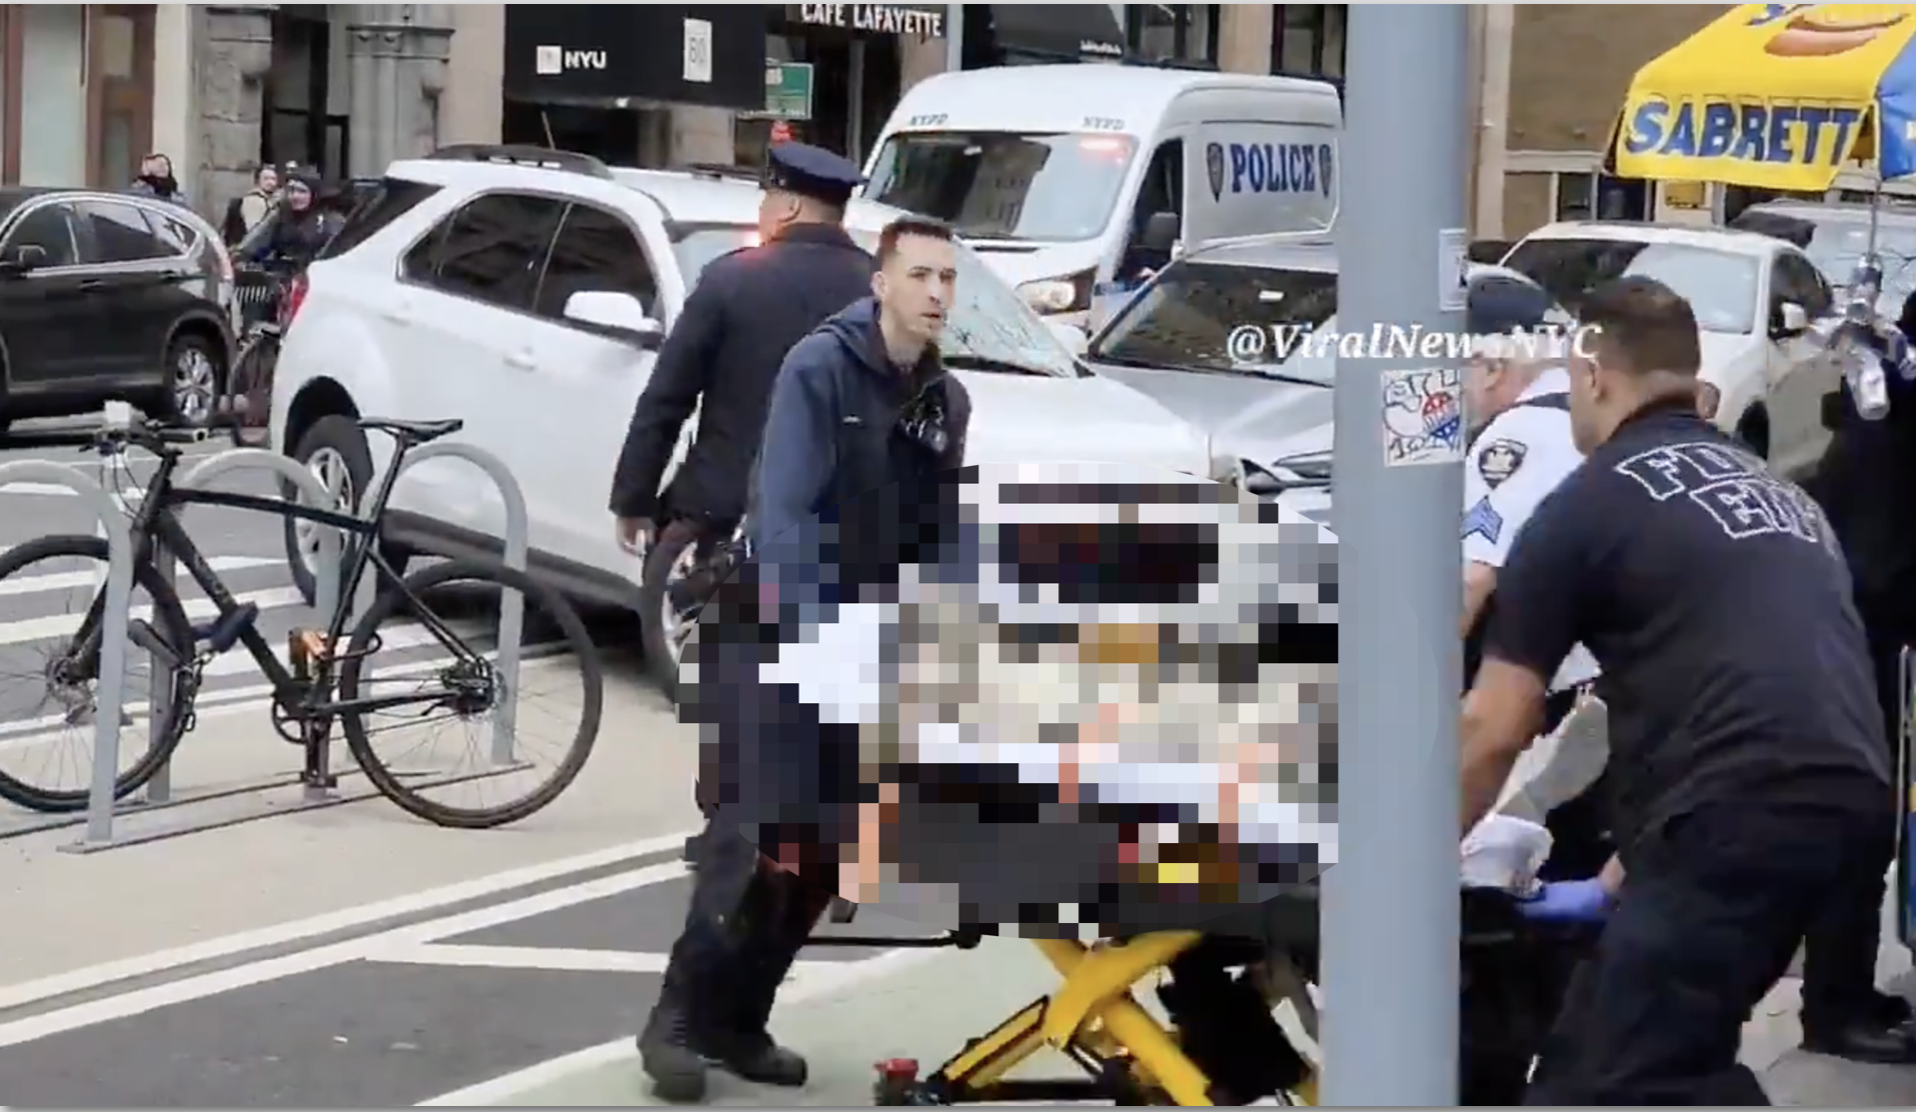 EXTREMELY GRAPHIC: Video Released Showing Fully Burned Body Wheeled Onto Ambulance